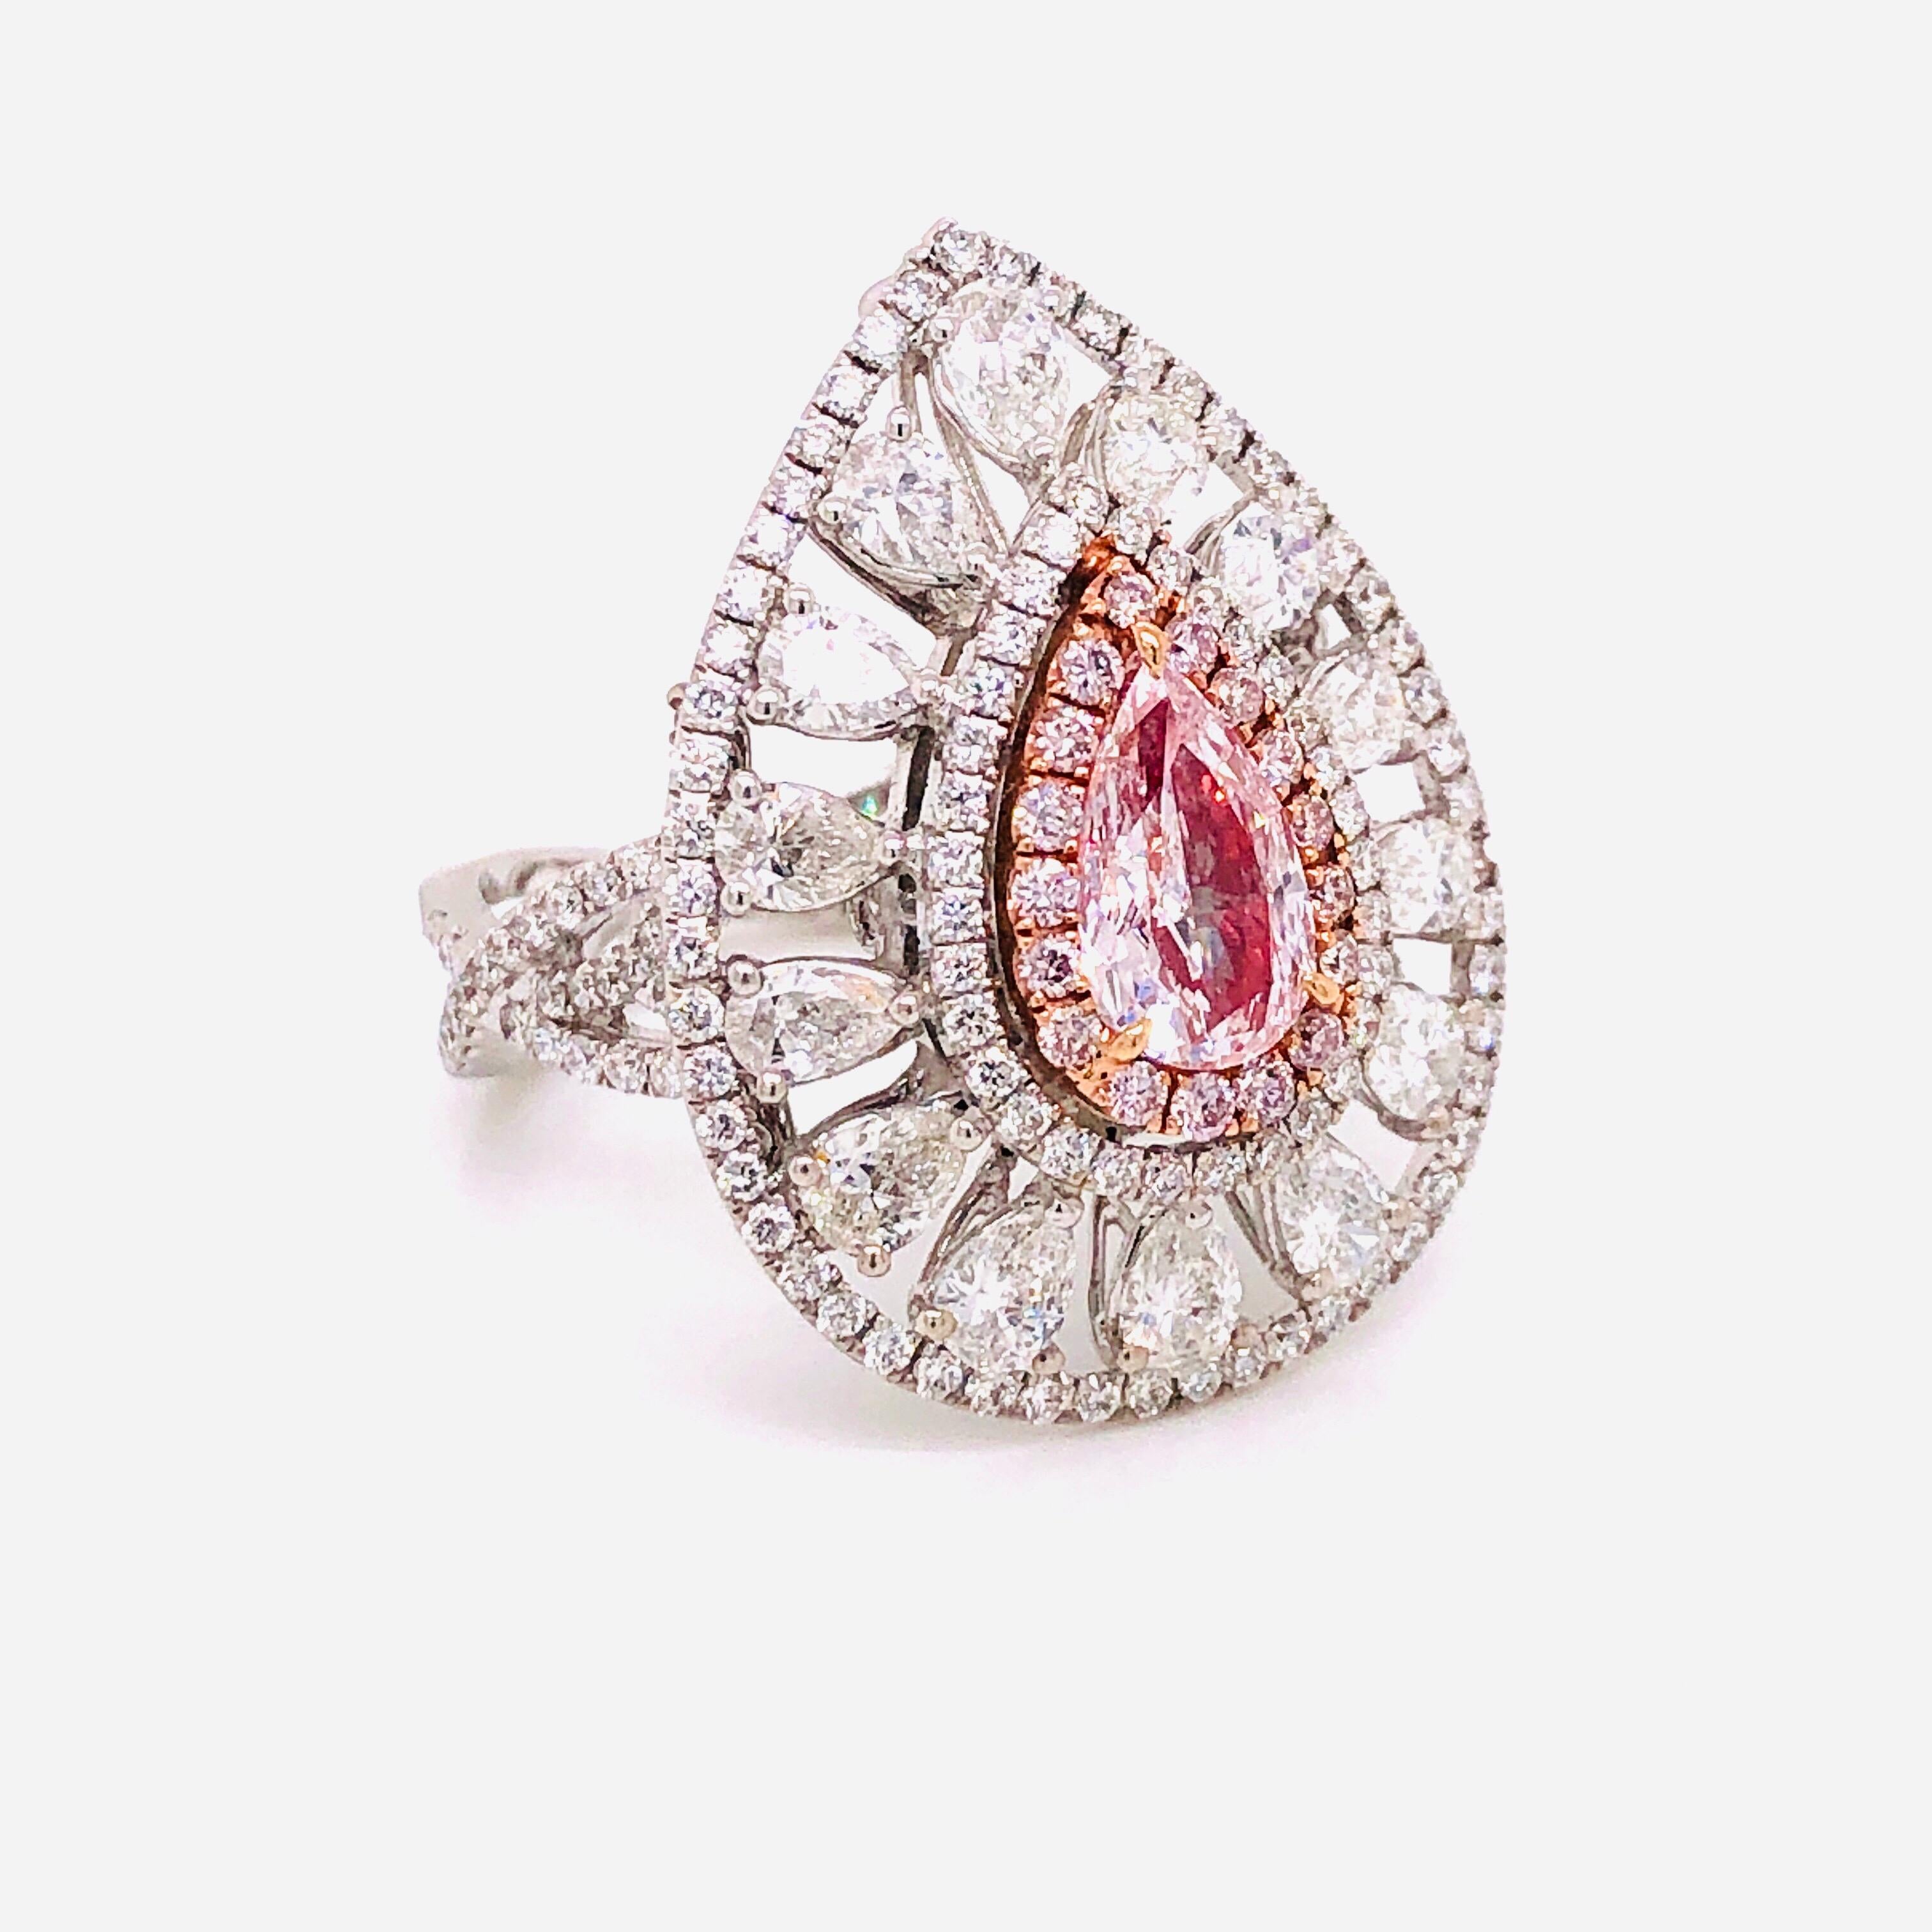 This lovely piece has been designed and manufactured in the Emilio Jewelry Atelier. Our brand is known for our perfection in jewelry making, and cherry picking the very best diamonds for our jewels. We specialize in Natural Fancy Diamonds. 
Approx